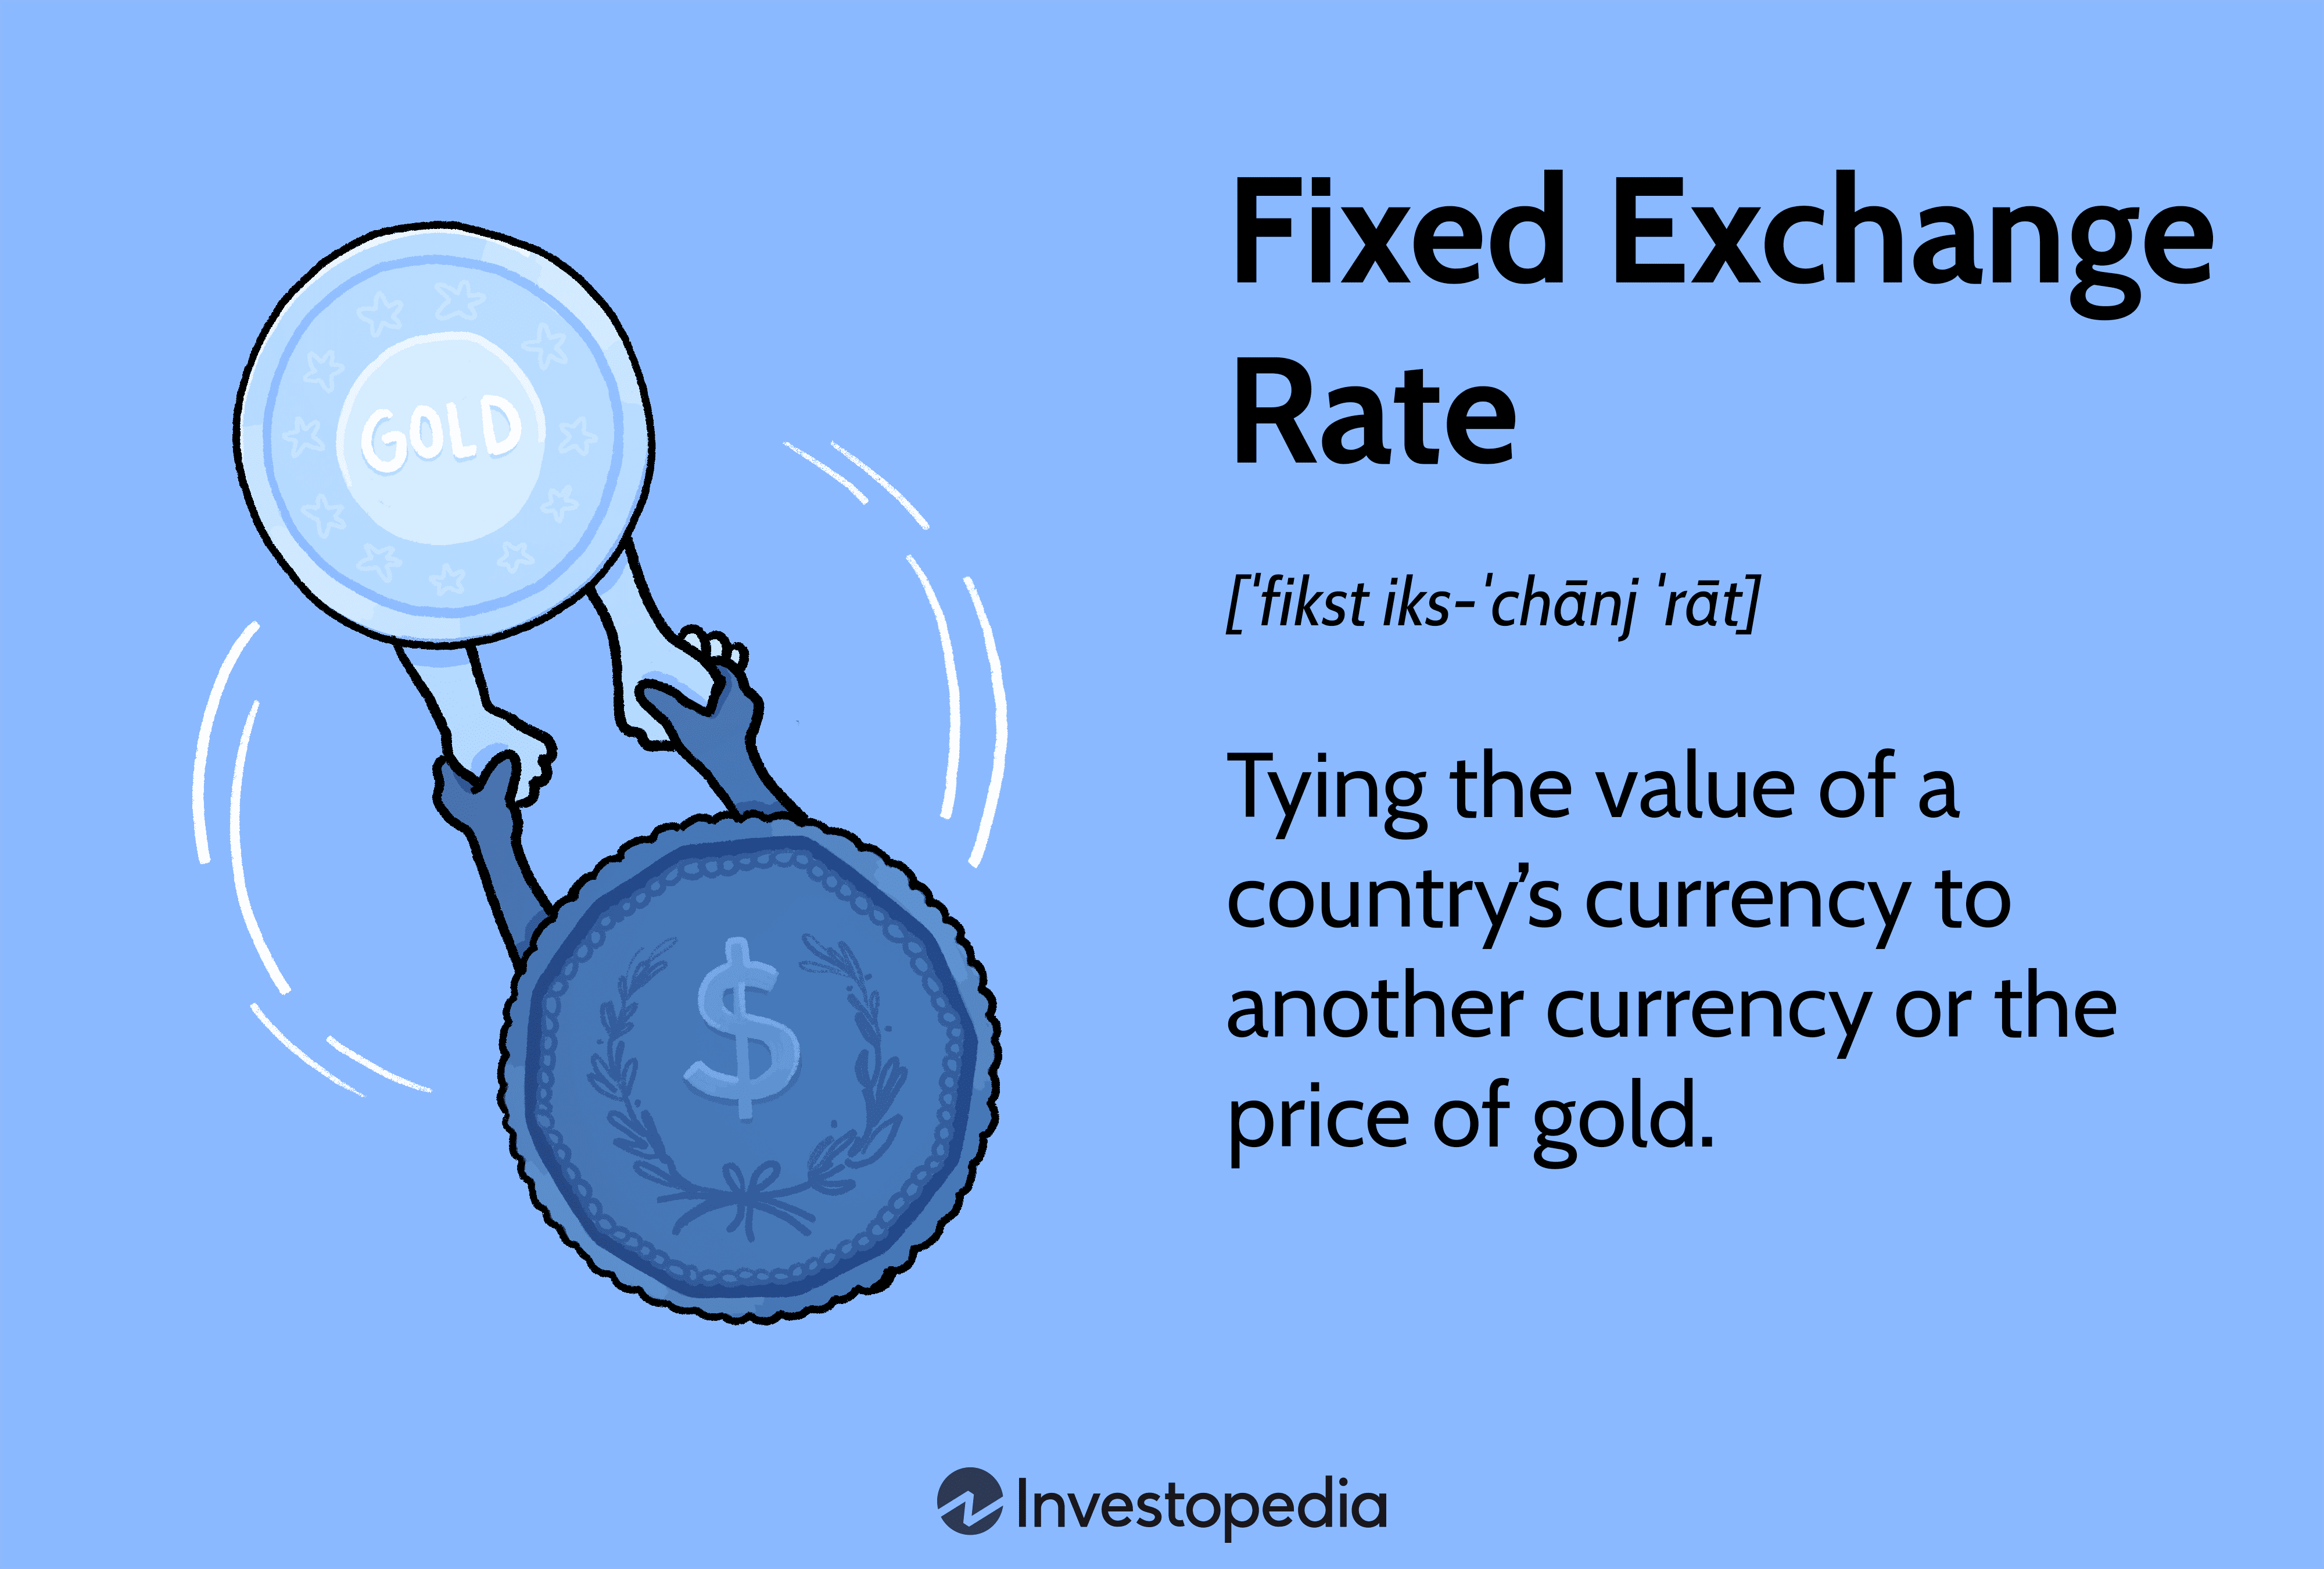 Fixed Exchange Rate: Tying the value of a countryâs currency to another currency or the price of gold.